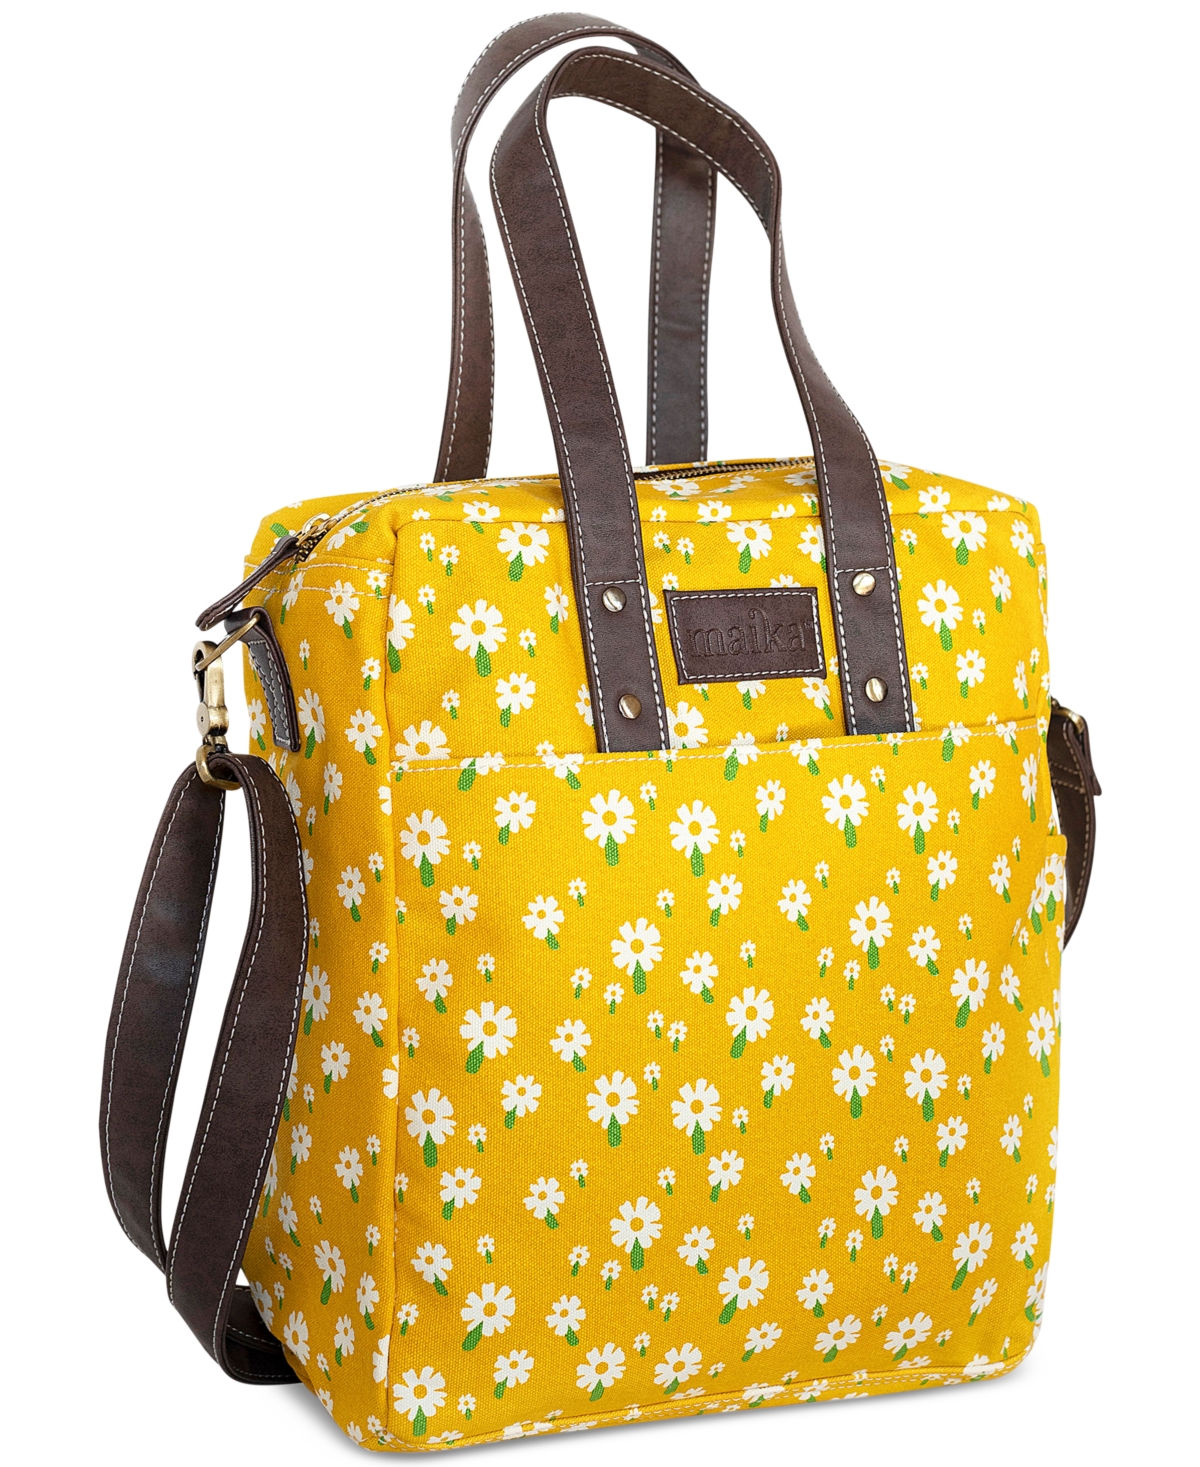 Caramel Floral-Print Canvas Commuter Tote Bag - Yellow